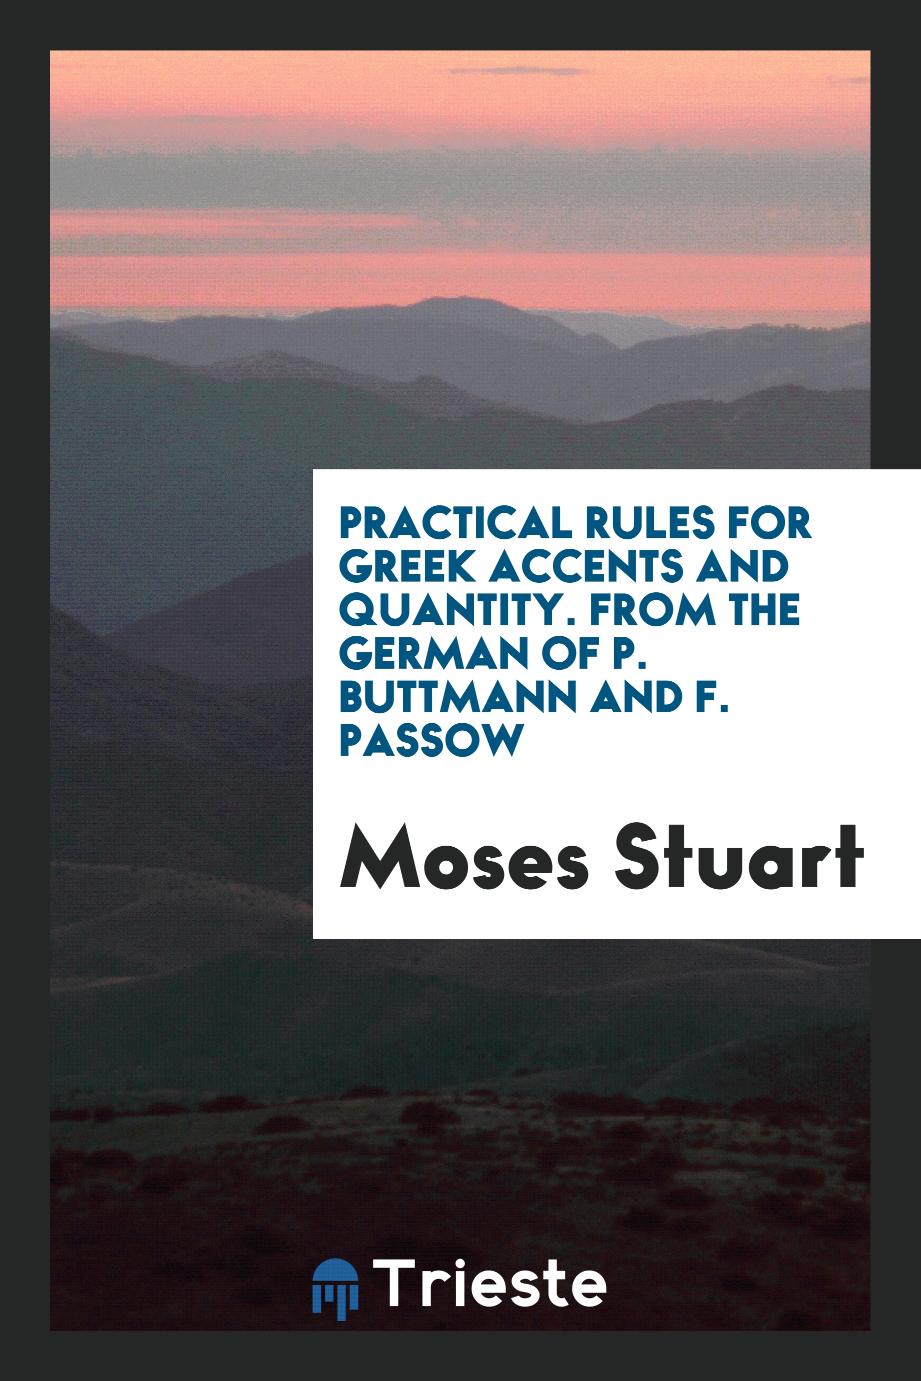 Practical Rules for Greek Accents and Quantity. From the German of P. Buttmann and F. Passow